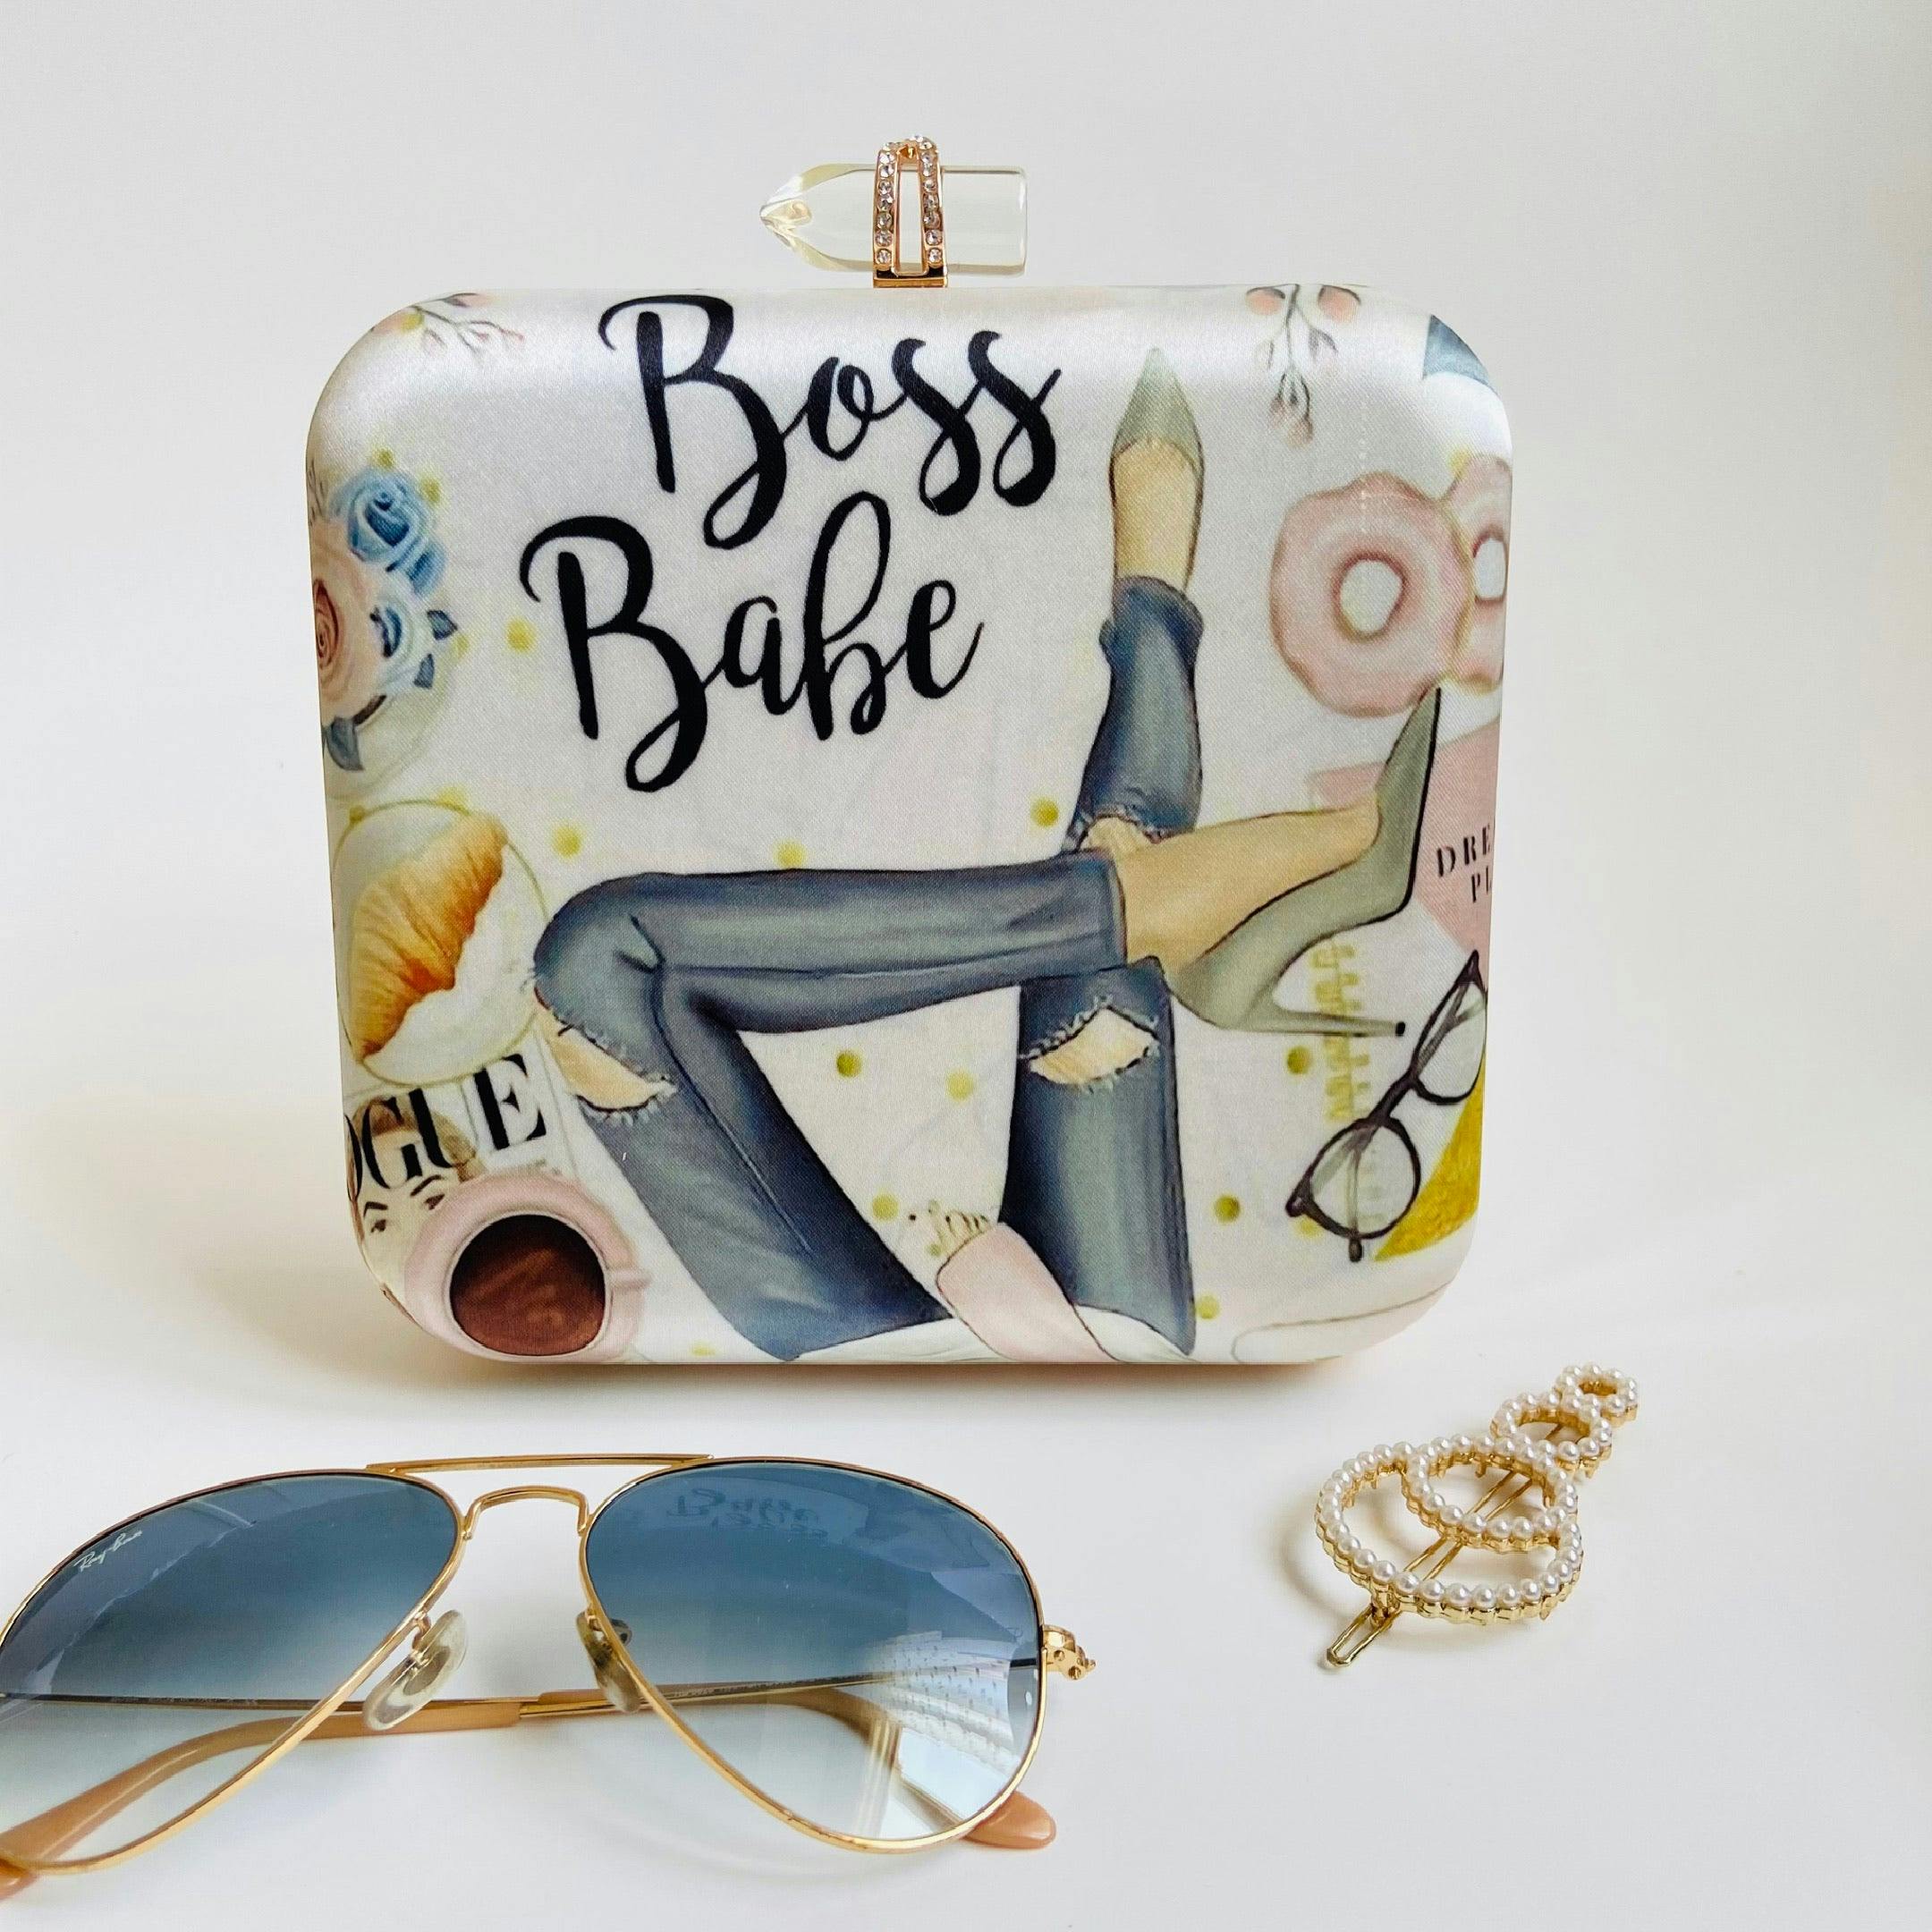 BOSS BABE, a product by Clutcheeet